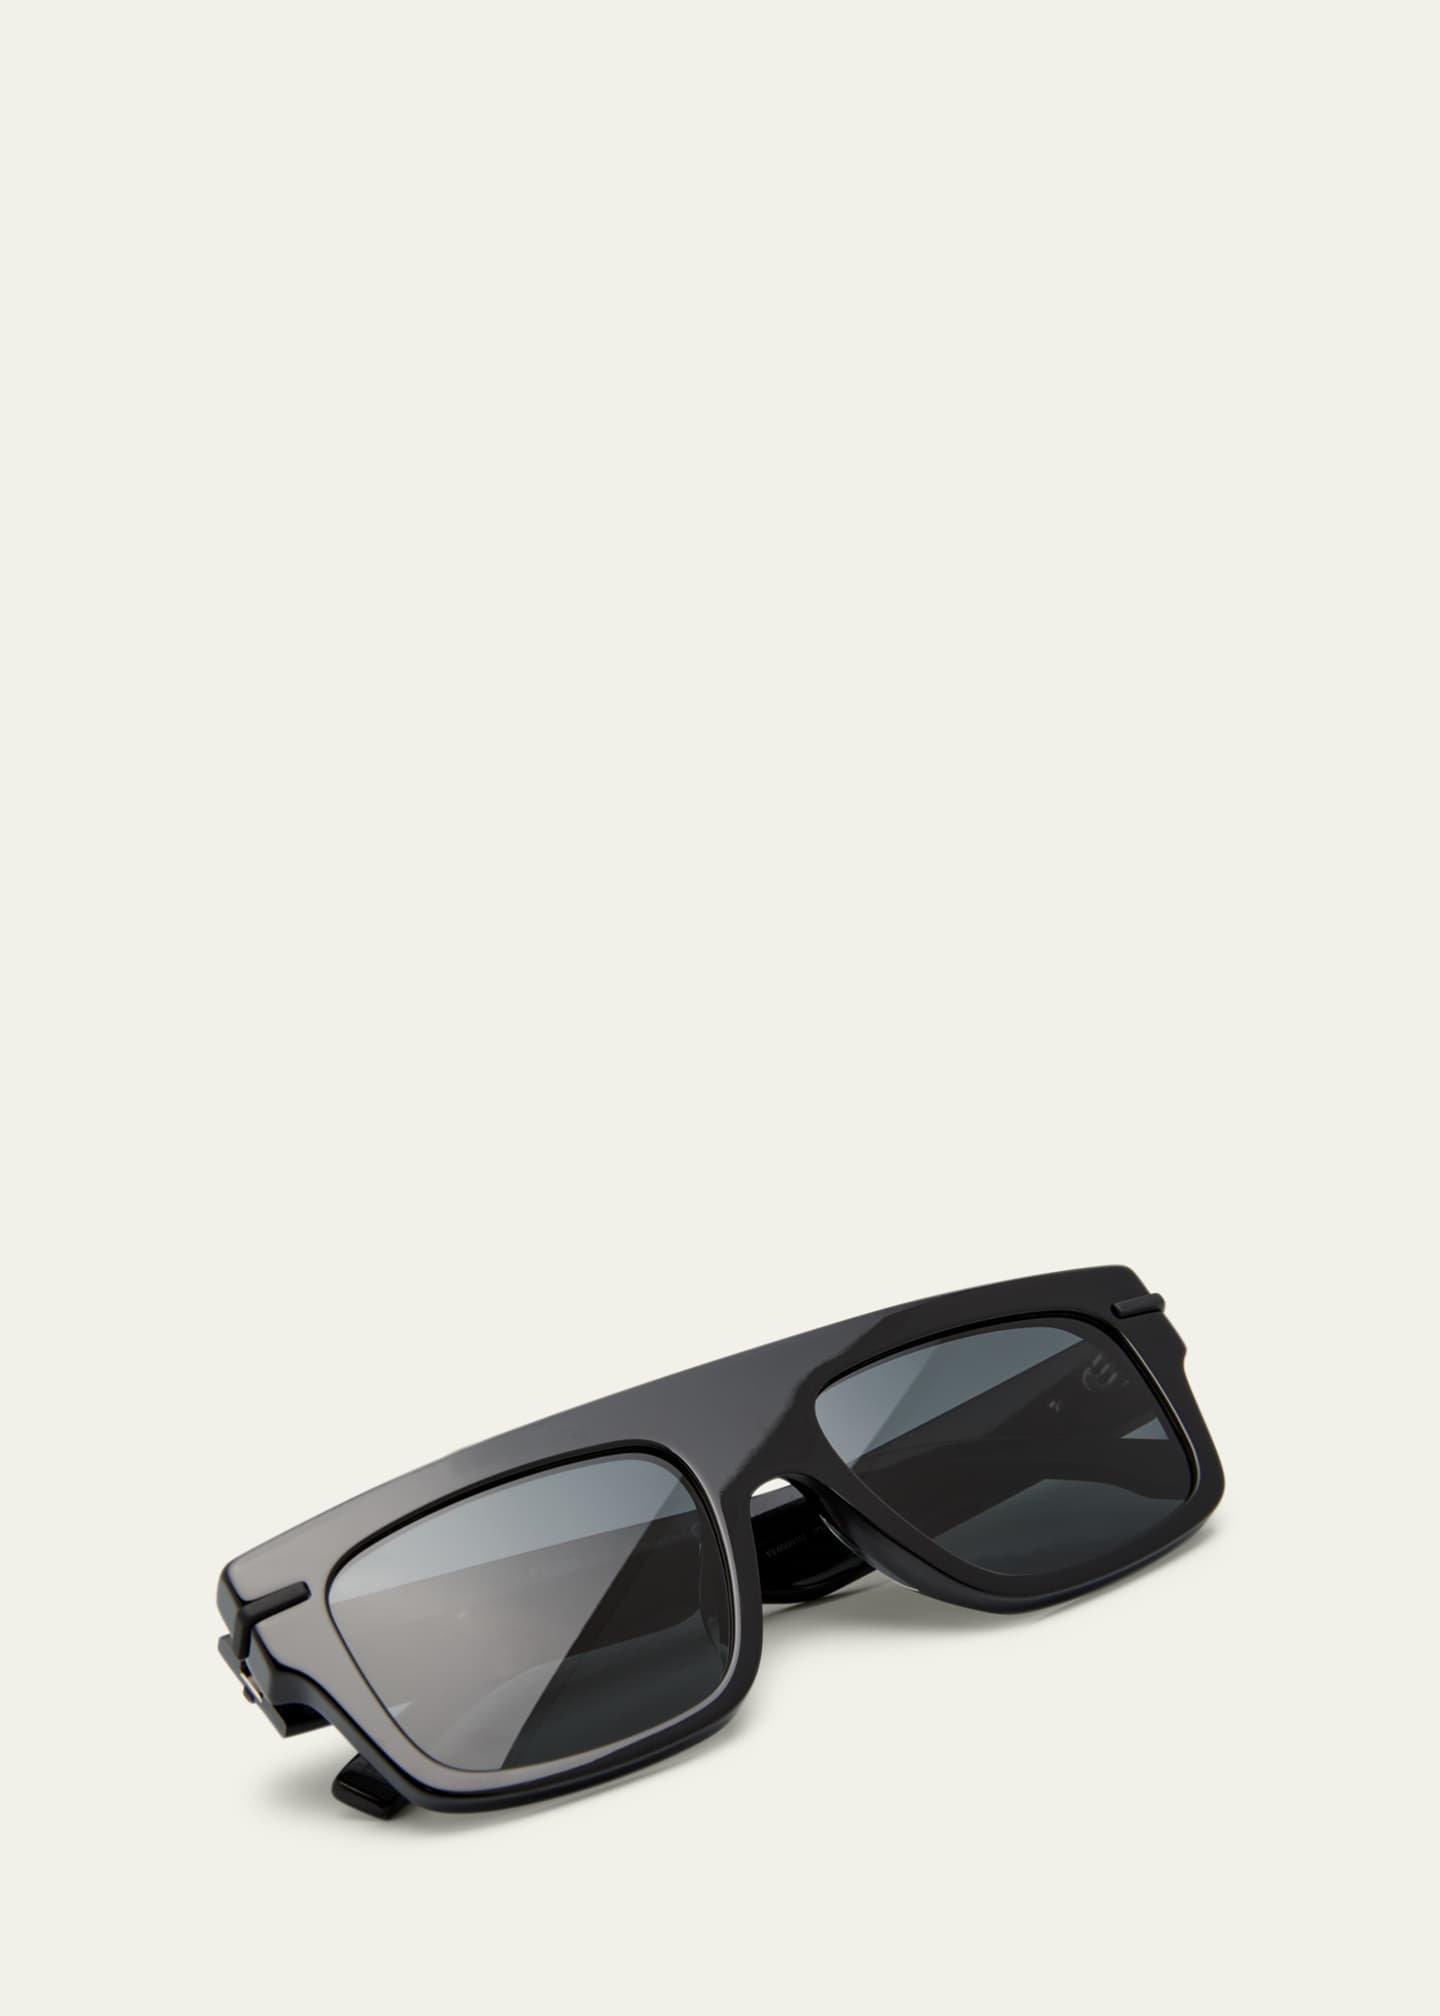 Fendi sunglasses - clothing & accessories - by owner - apparel